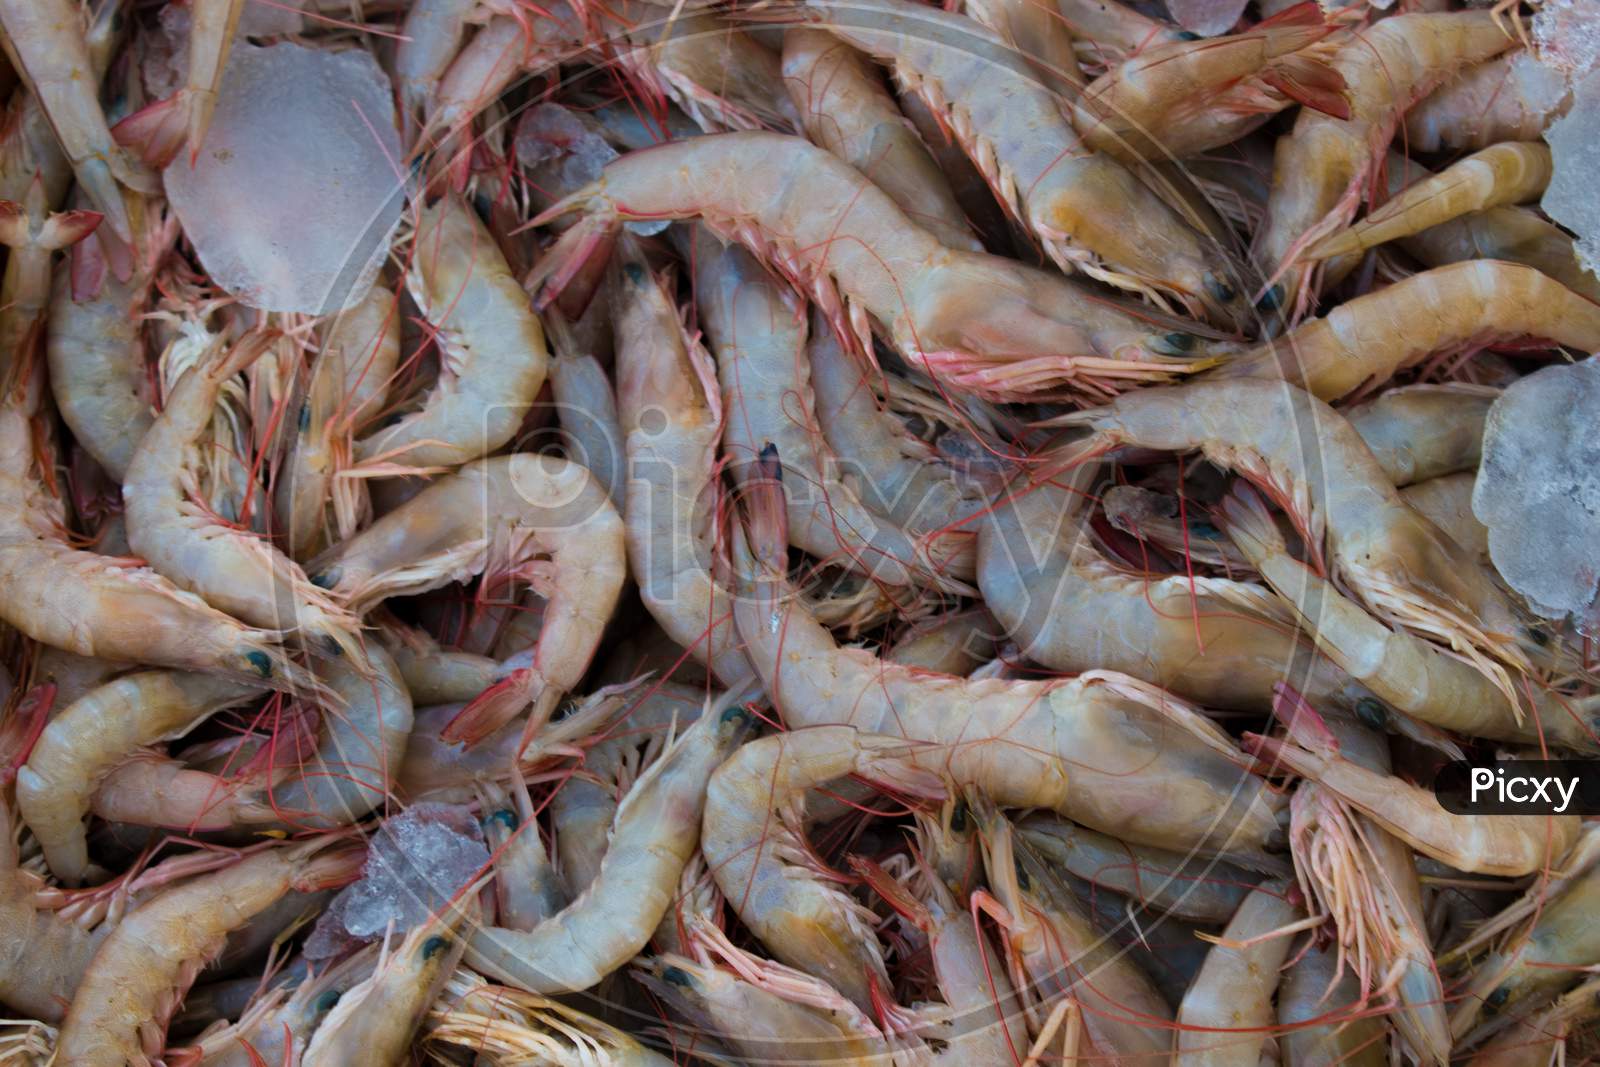 Collection Of Caridean Shrimp Kept In Ice For Sale In The Market.